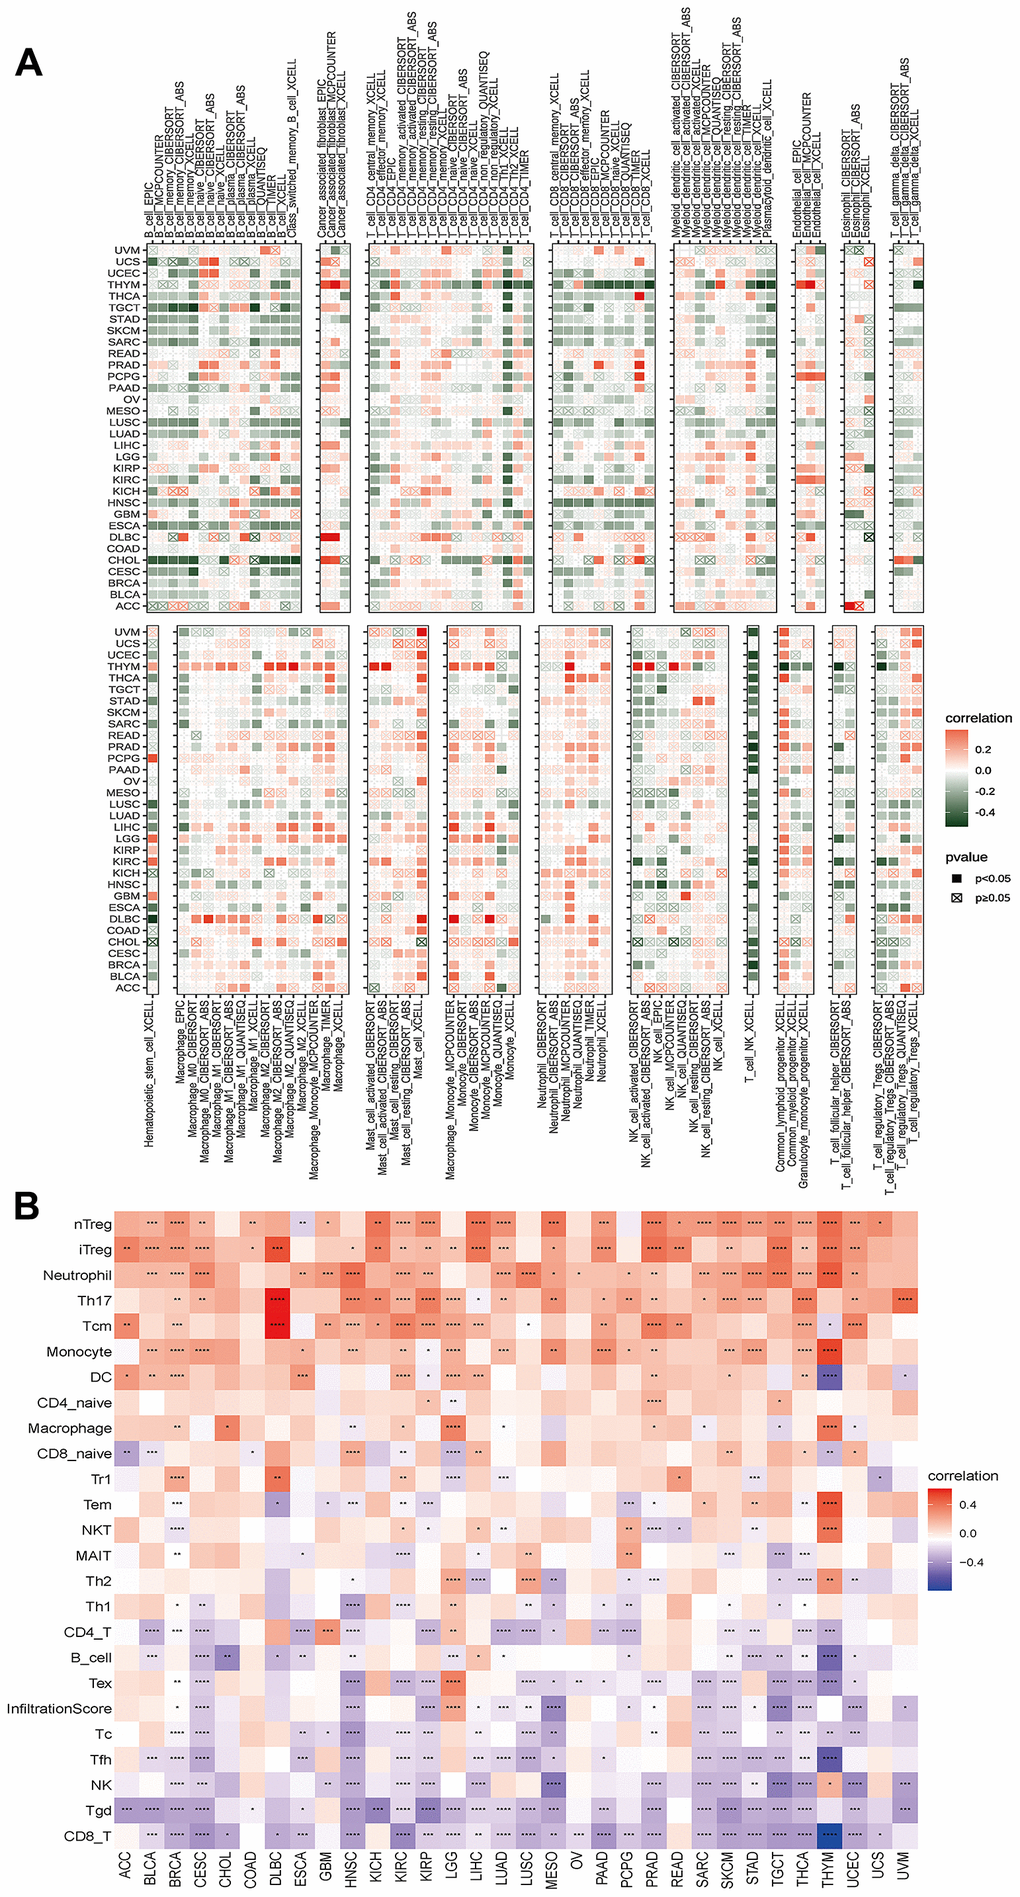 Analyses of the associations between immune cell infiltration and the disulfidptosis score were performed on a variety of tumor types. (A) The correlation between disulfidptosis score and different immune cell infiltrations using the TIMER2 database in pan-cancer. (B) The correlation between disulfidptosis score and different immune cell infiltrations using the ImmuCellAI database in pan-cancer. The red label indicated a positive correlation with the disulfidptosis score, and the dark green label indicated a negative correlation with the disulfidptosis score. *P